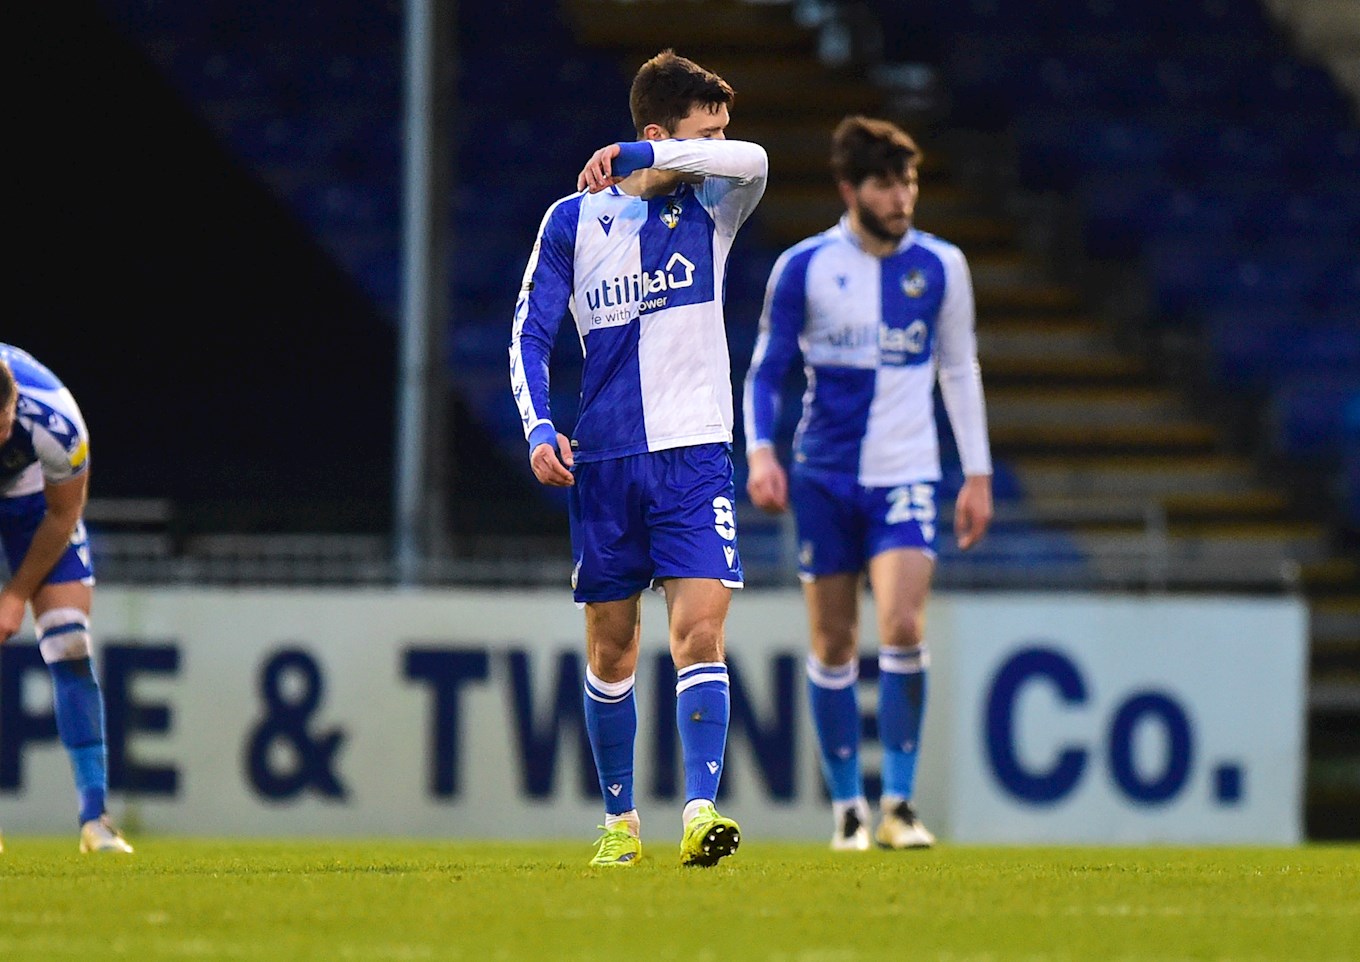 rochdale v wigan betting preview goal